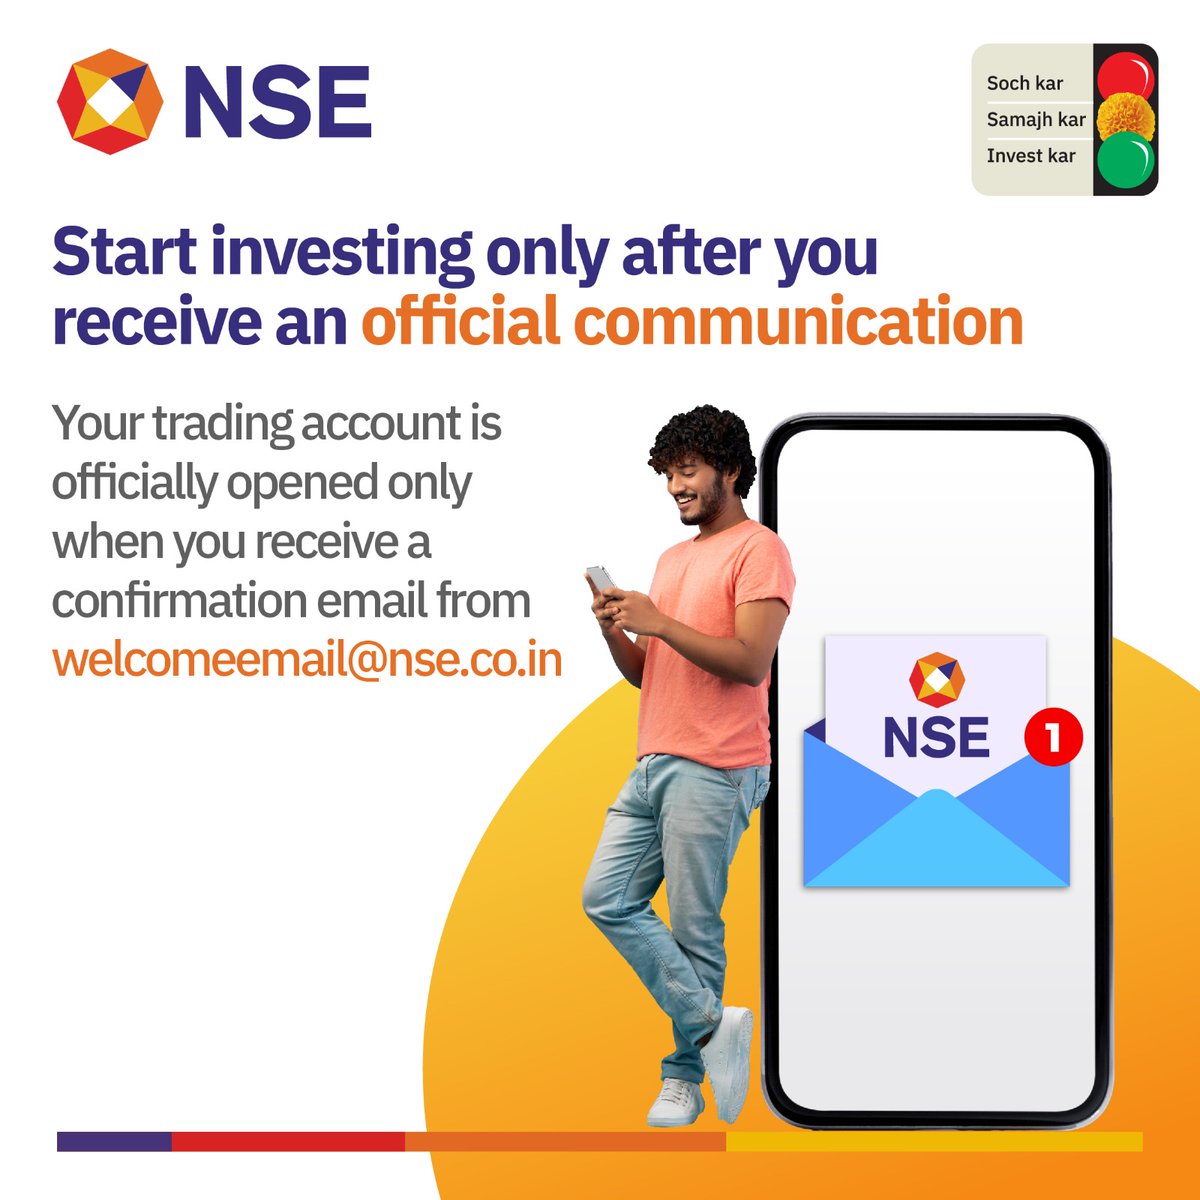 Consider your trading account opened only when you receive an email from welcomeemail@nse.co.in and SMS from NSEWEL. For any queries, email us at ignse@nse.co.in.

#NSE #TradingAccount #InvestorAwareness @ashishchauhan